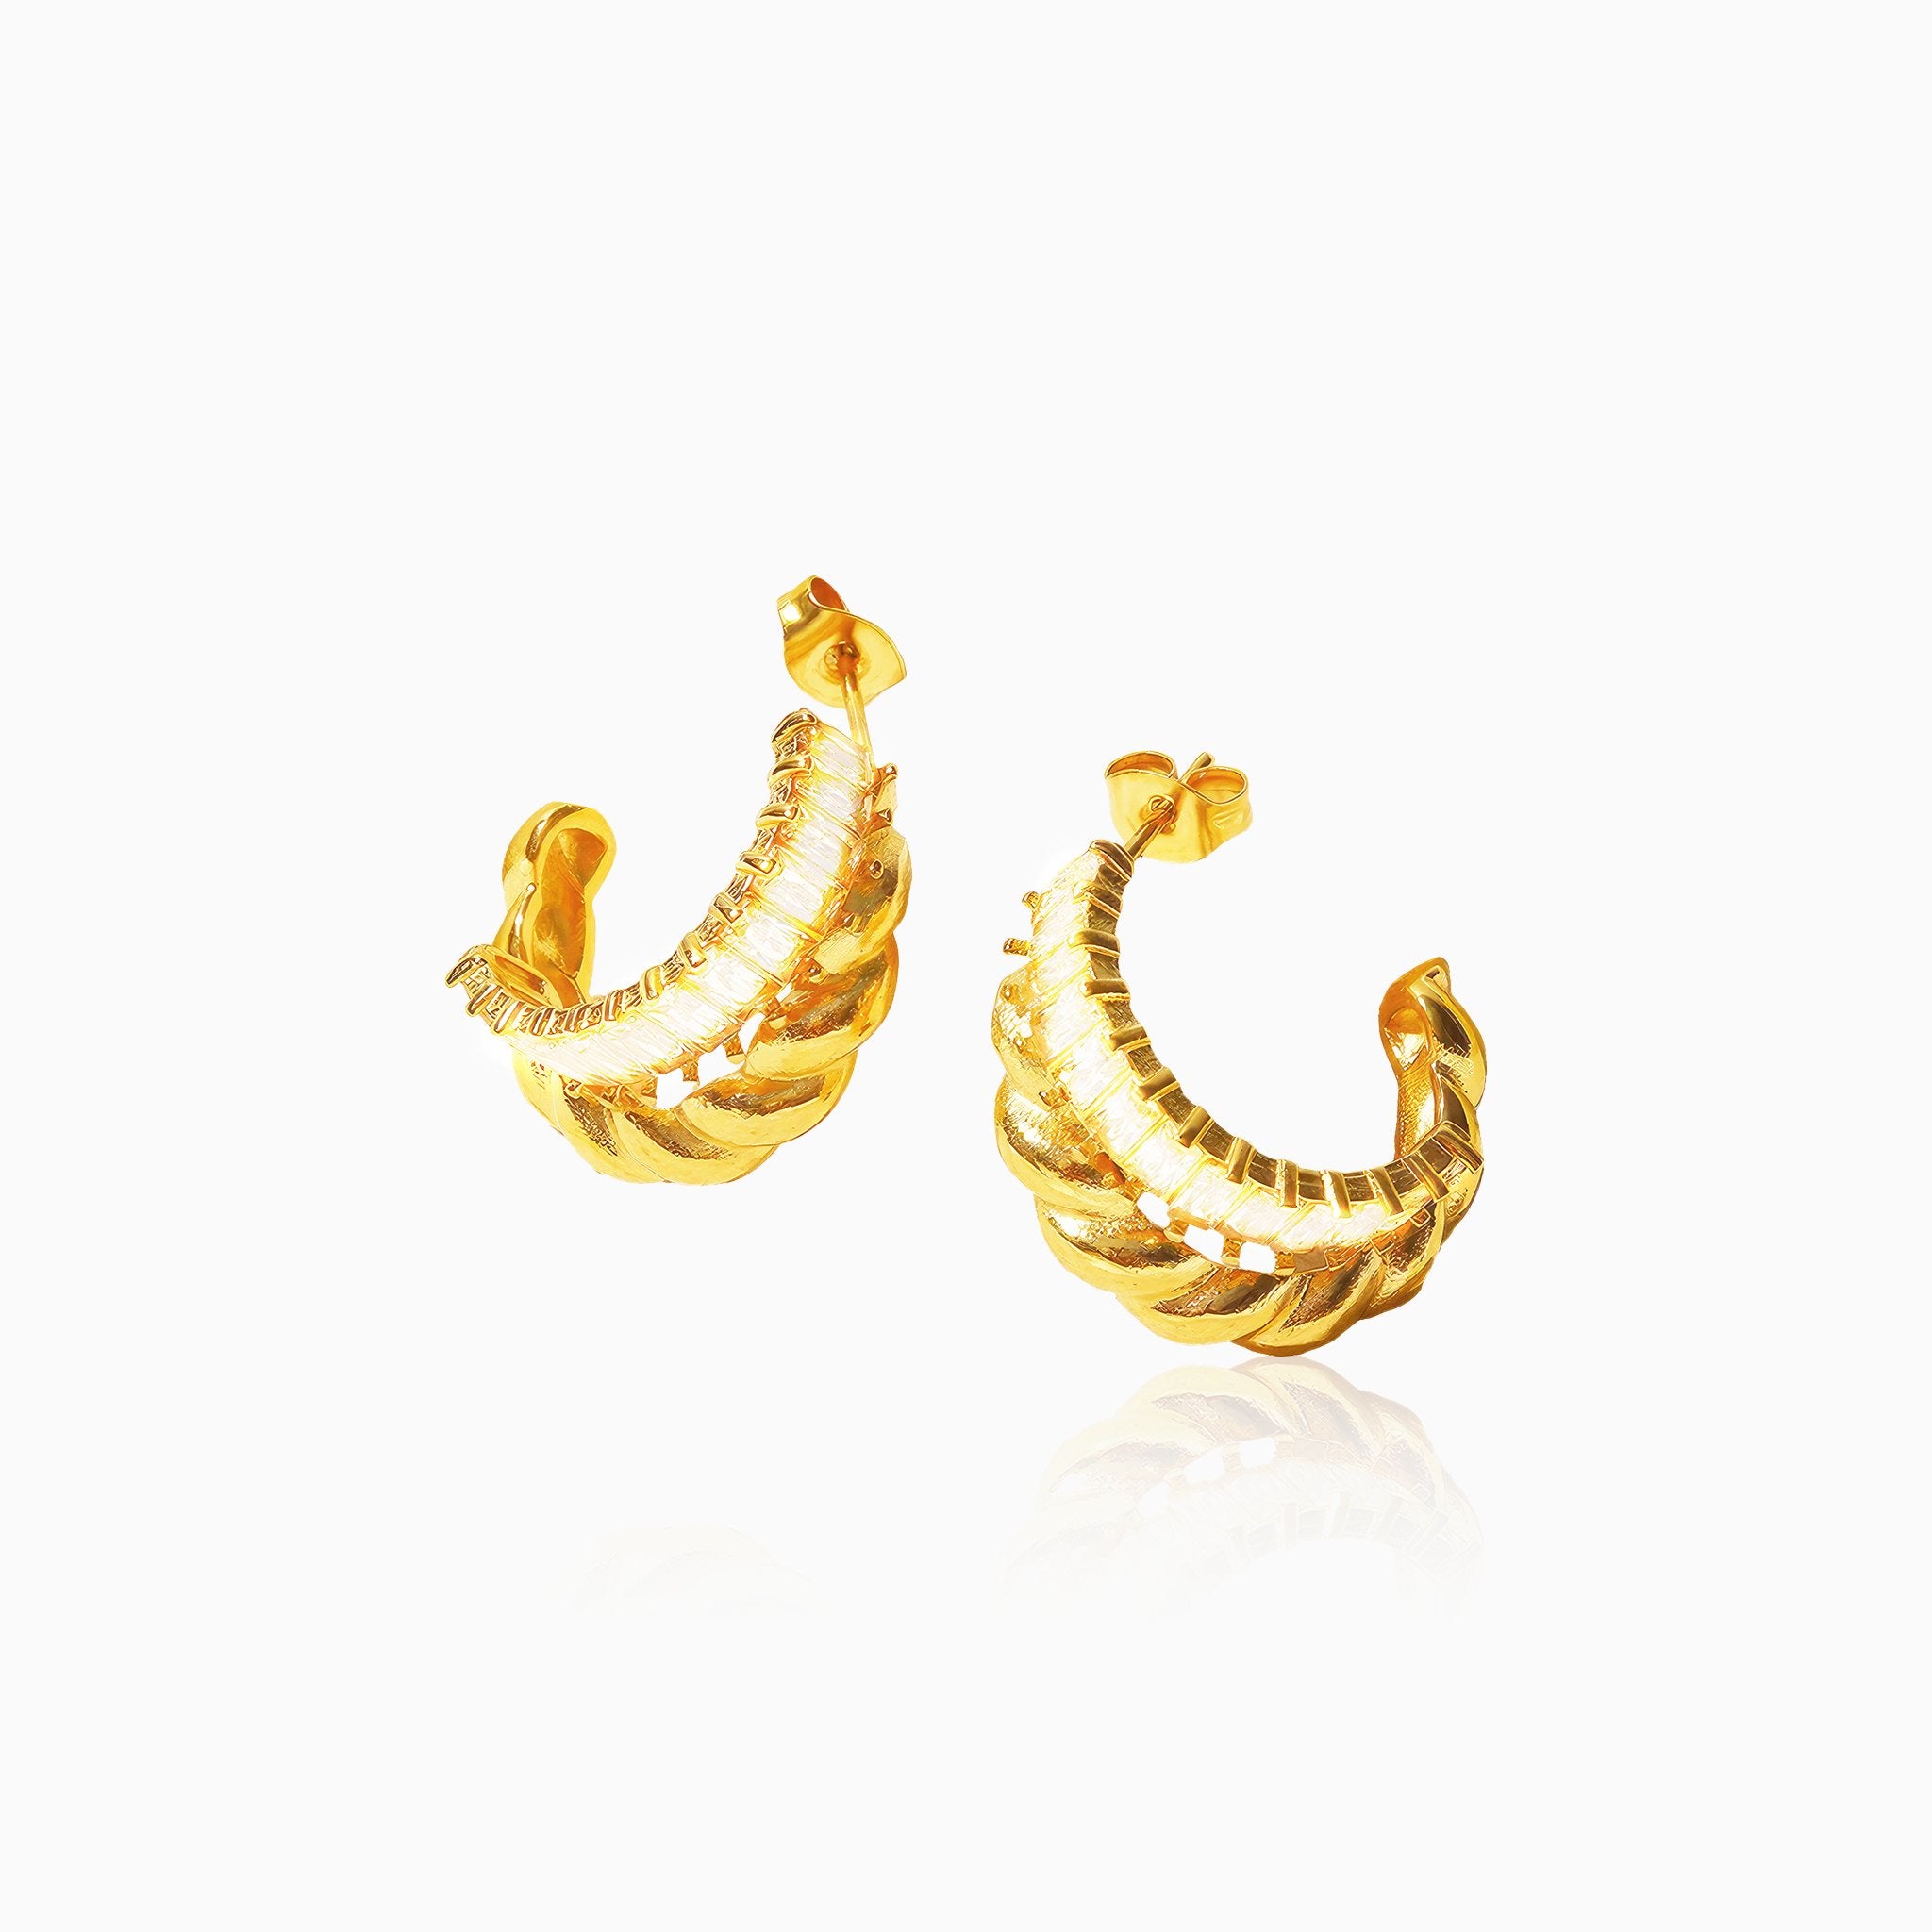 C-Shaped Earrings with White Gemstones - Nobbier - Earrings - 18K Gold And Titanium PVD Coated Jewelry